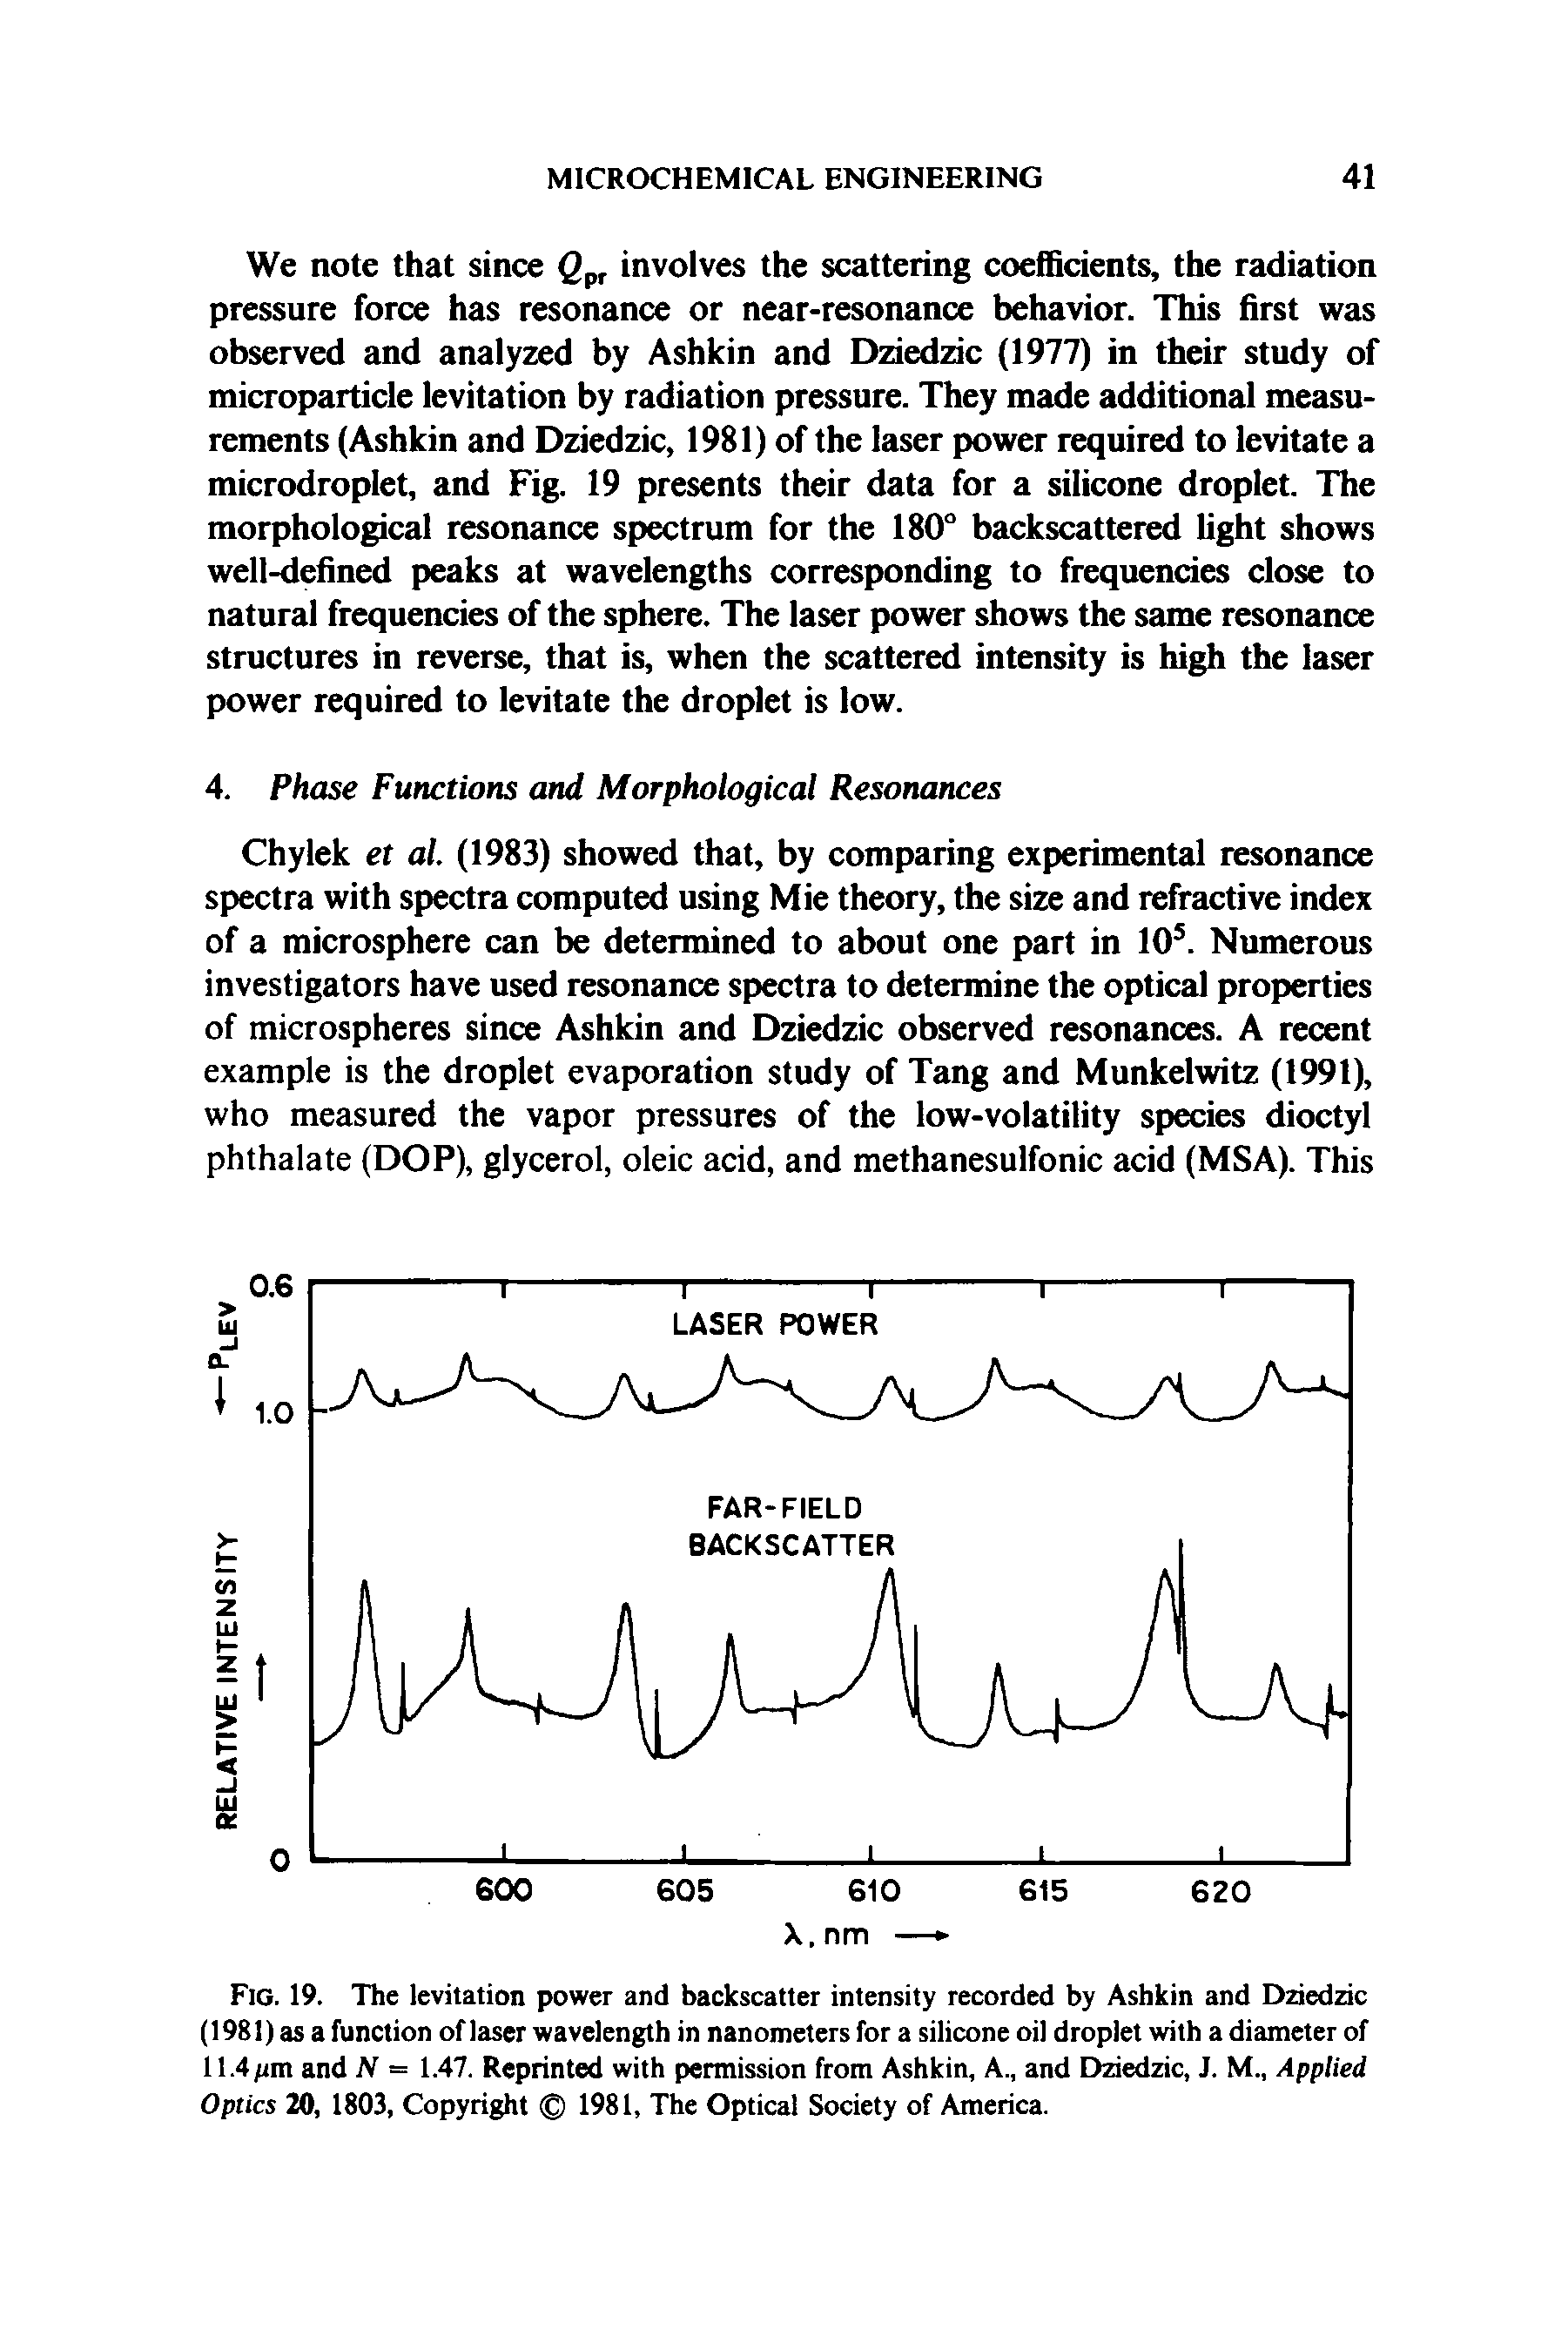 Fig. 19. The levitation power and backscatter intensity recorded by Ashkin and Dziedzic (1981) as a function of laser wavelength in nanometers for a silicone oil droplet with a diameter of 11.4/im and N = 1.47. Reprinted with permission from Ashkin, A., and Dziedzic, J. M., Applied Optics 20, 1803, Copyright 1981, The Optical Society of America.